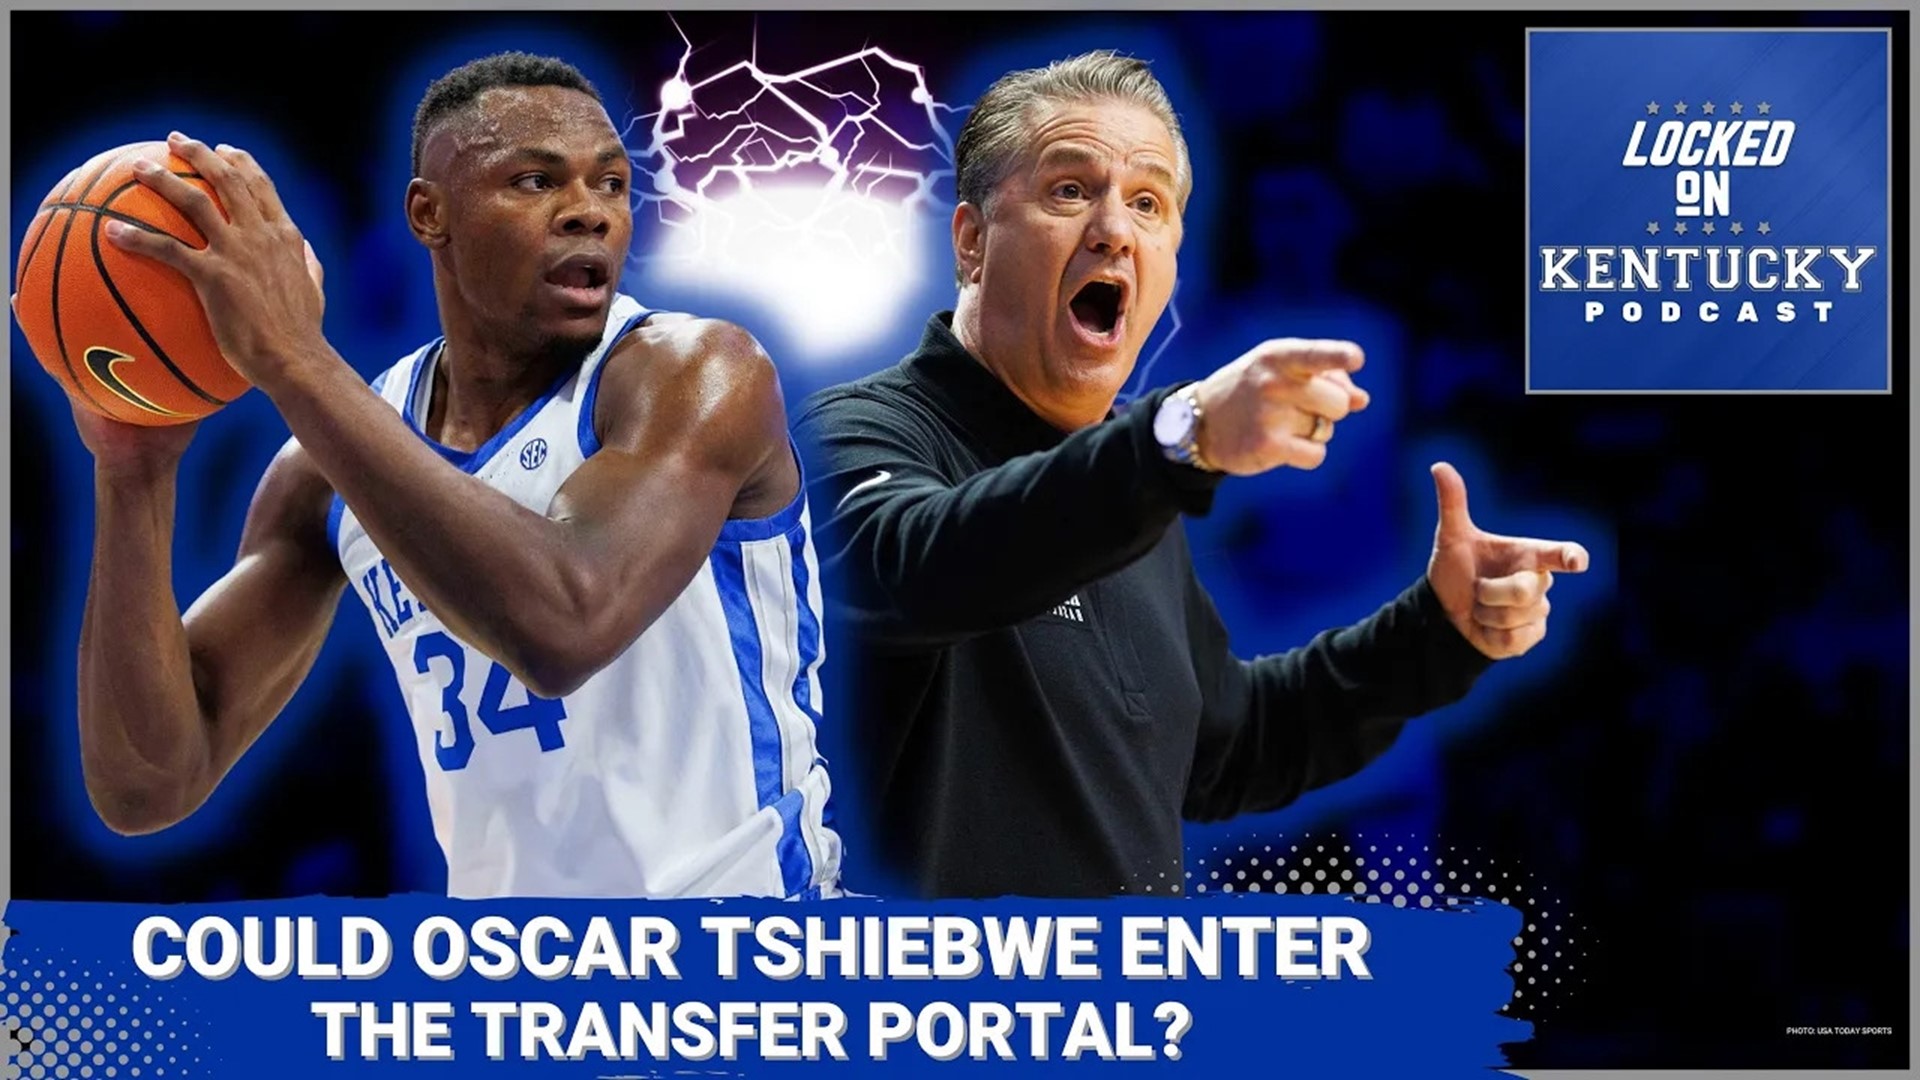 Could Oscar Tshiebwe return to college basketball, but instead of coming back to play for Kentucky basketball, enter the transfer portal?